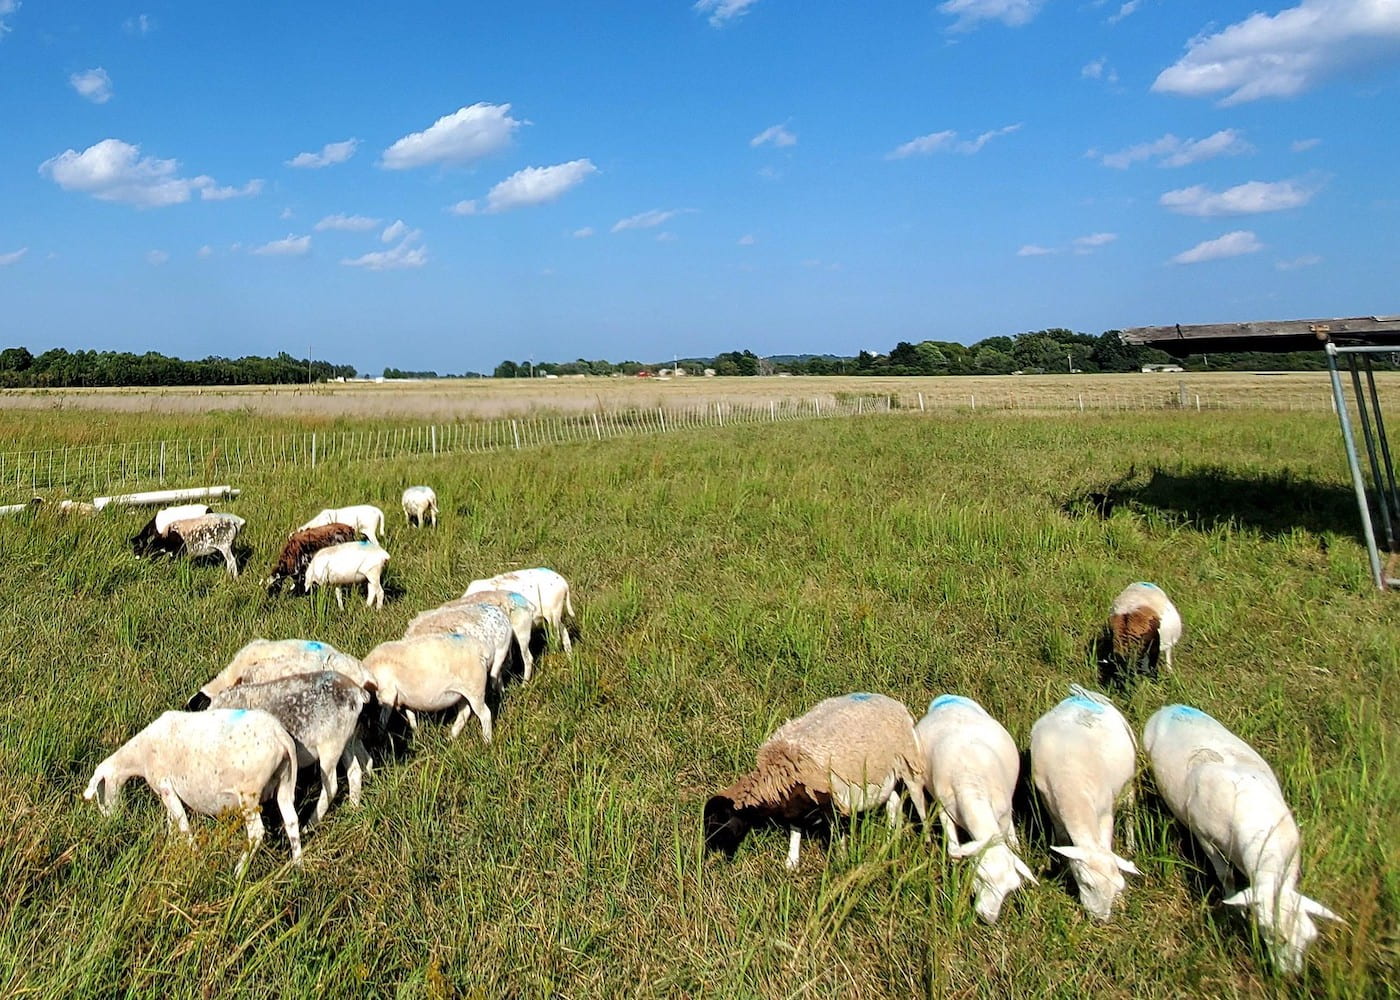 FIELD DAY — Sheep graze at the Milo J. Shult Agricultural Research and Extension Center in Fayetteville, site of the Oct. 28 Northwest Arkansas Small Ruminants Field Day. (U of A System Division of Agriculture photo)